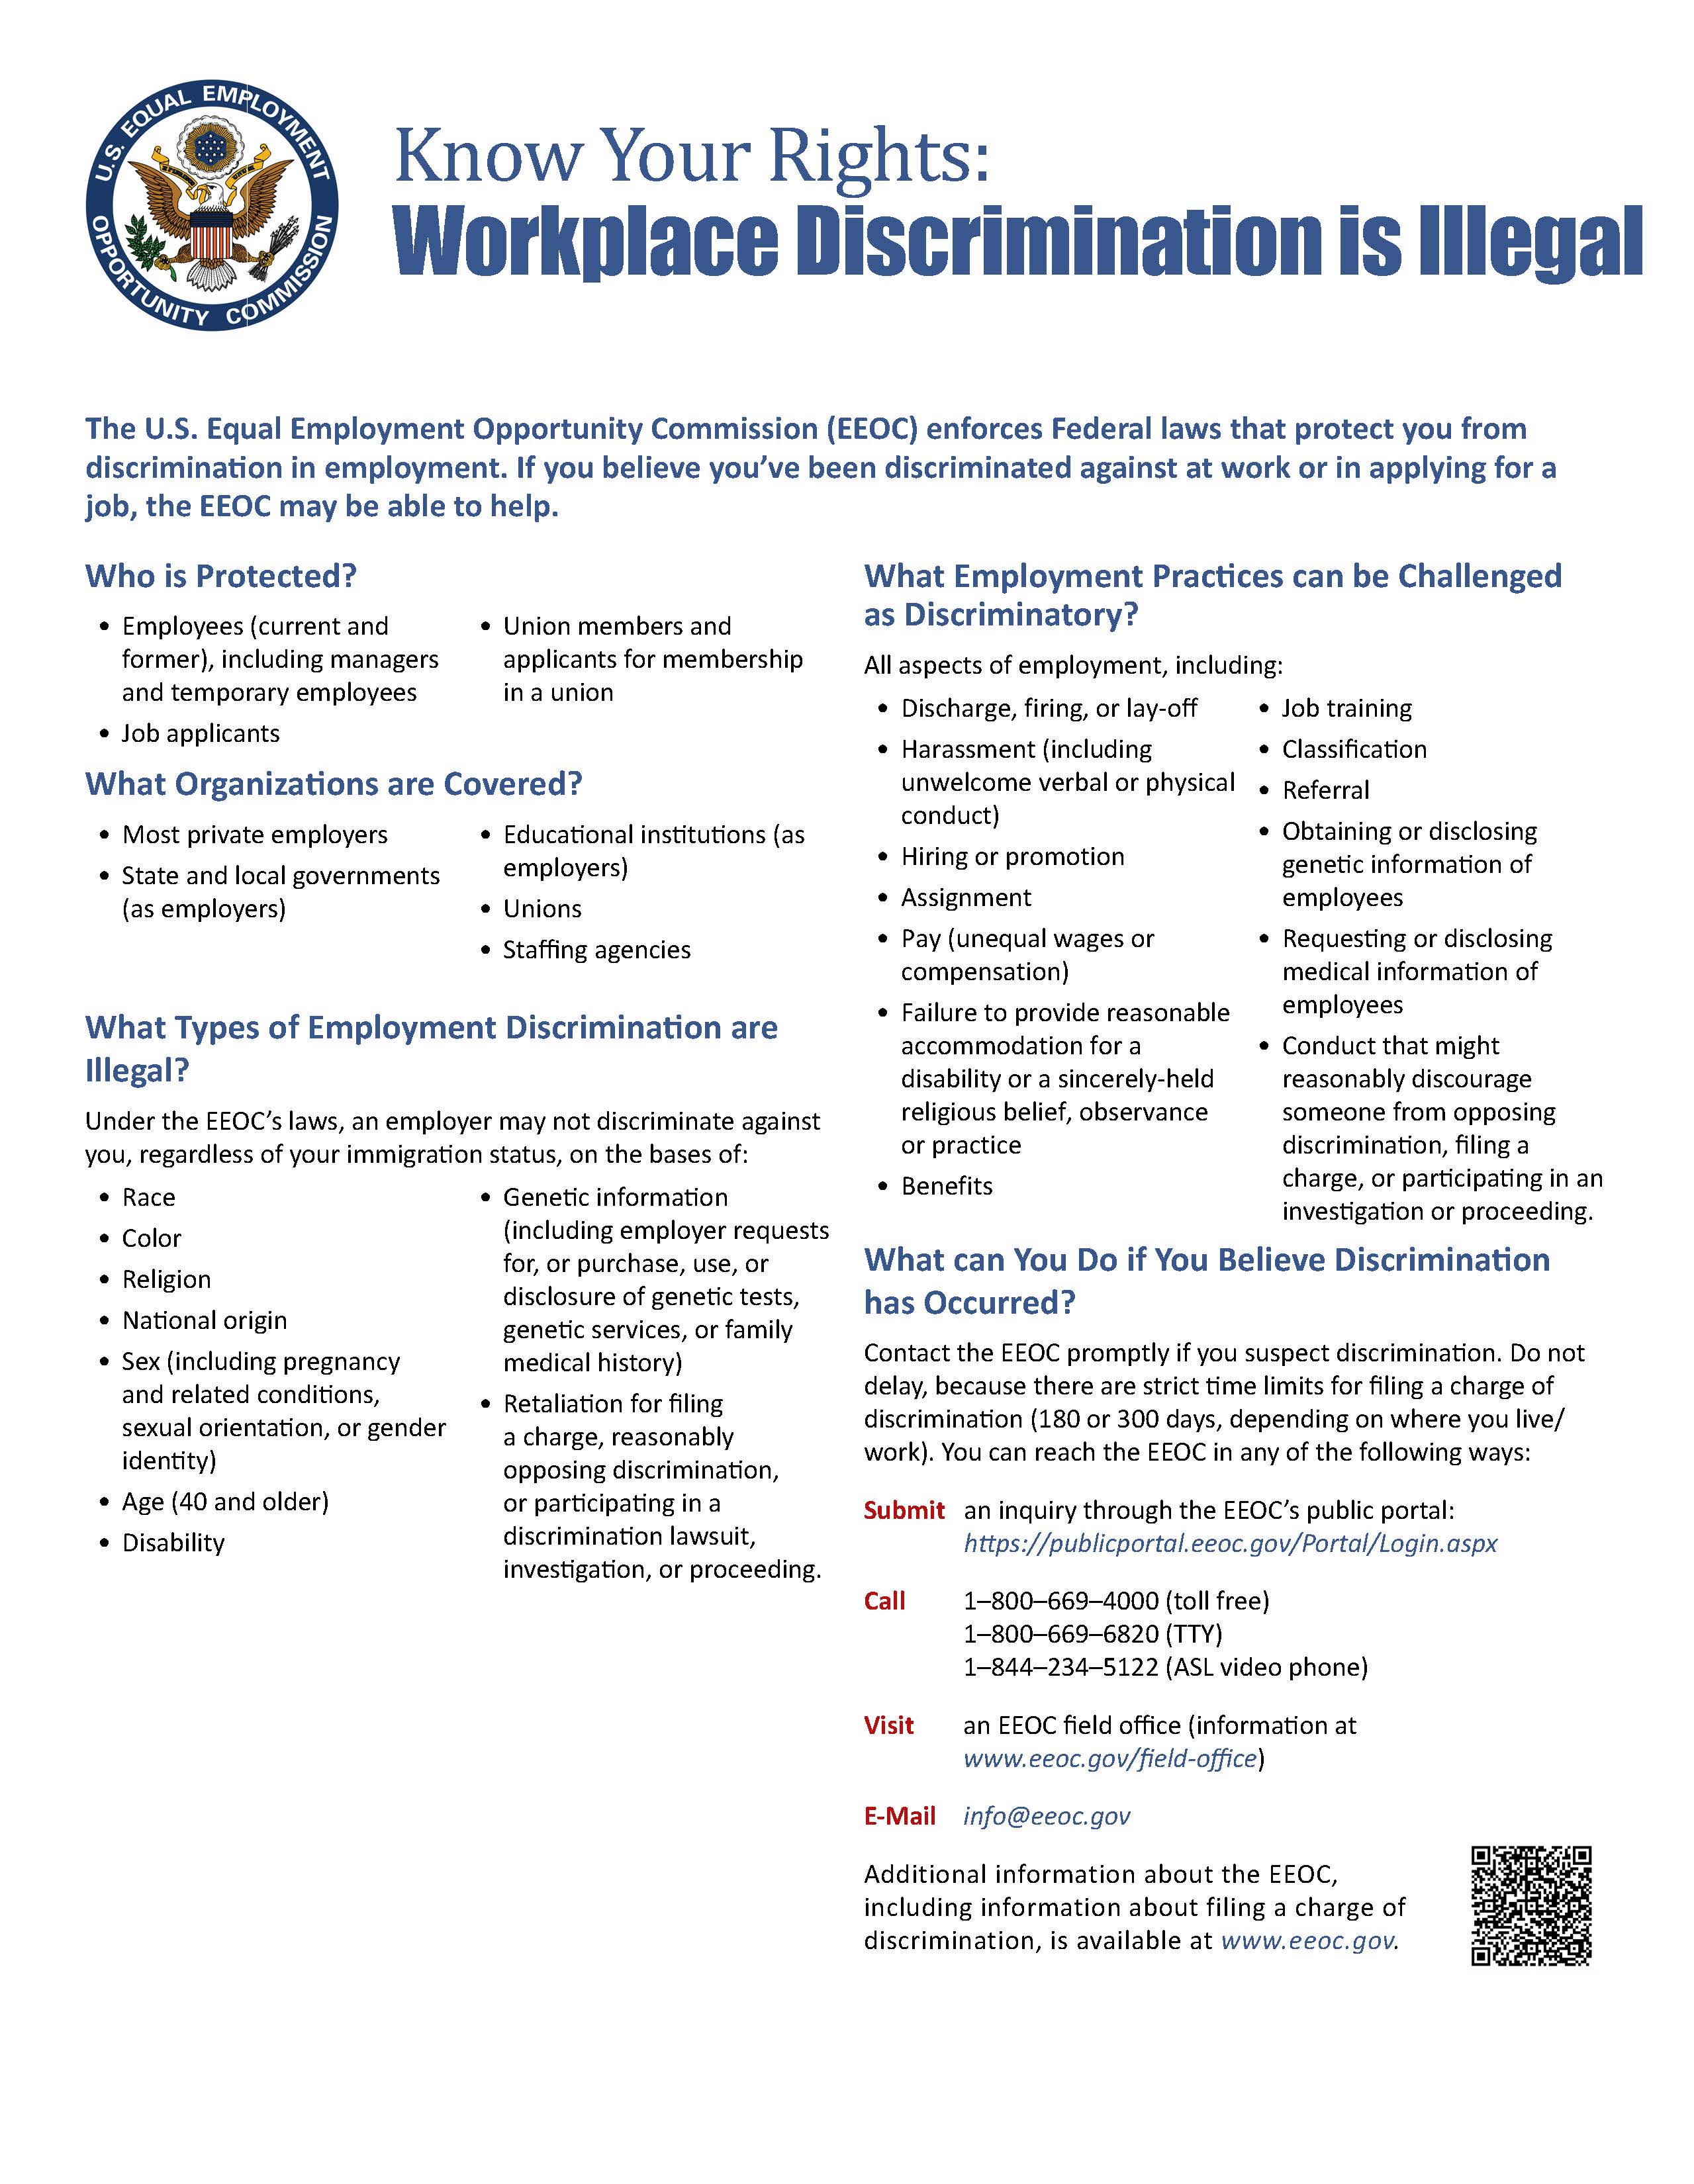 EEOC_KnowYourRights_screen_reader_10_20_Page_1